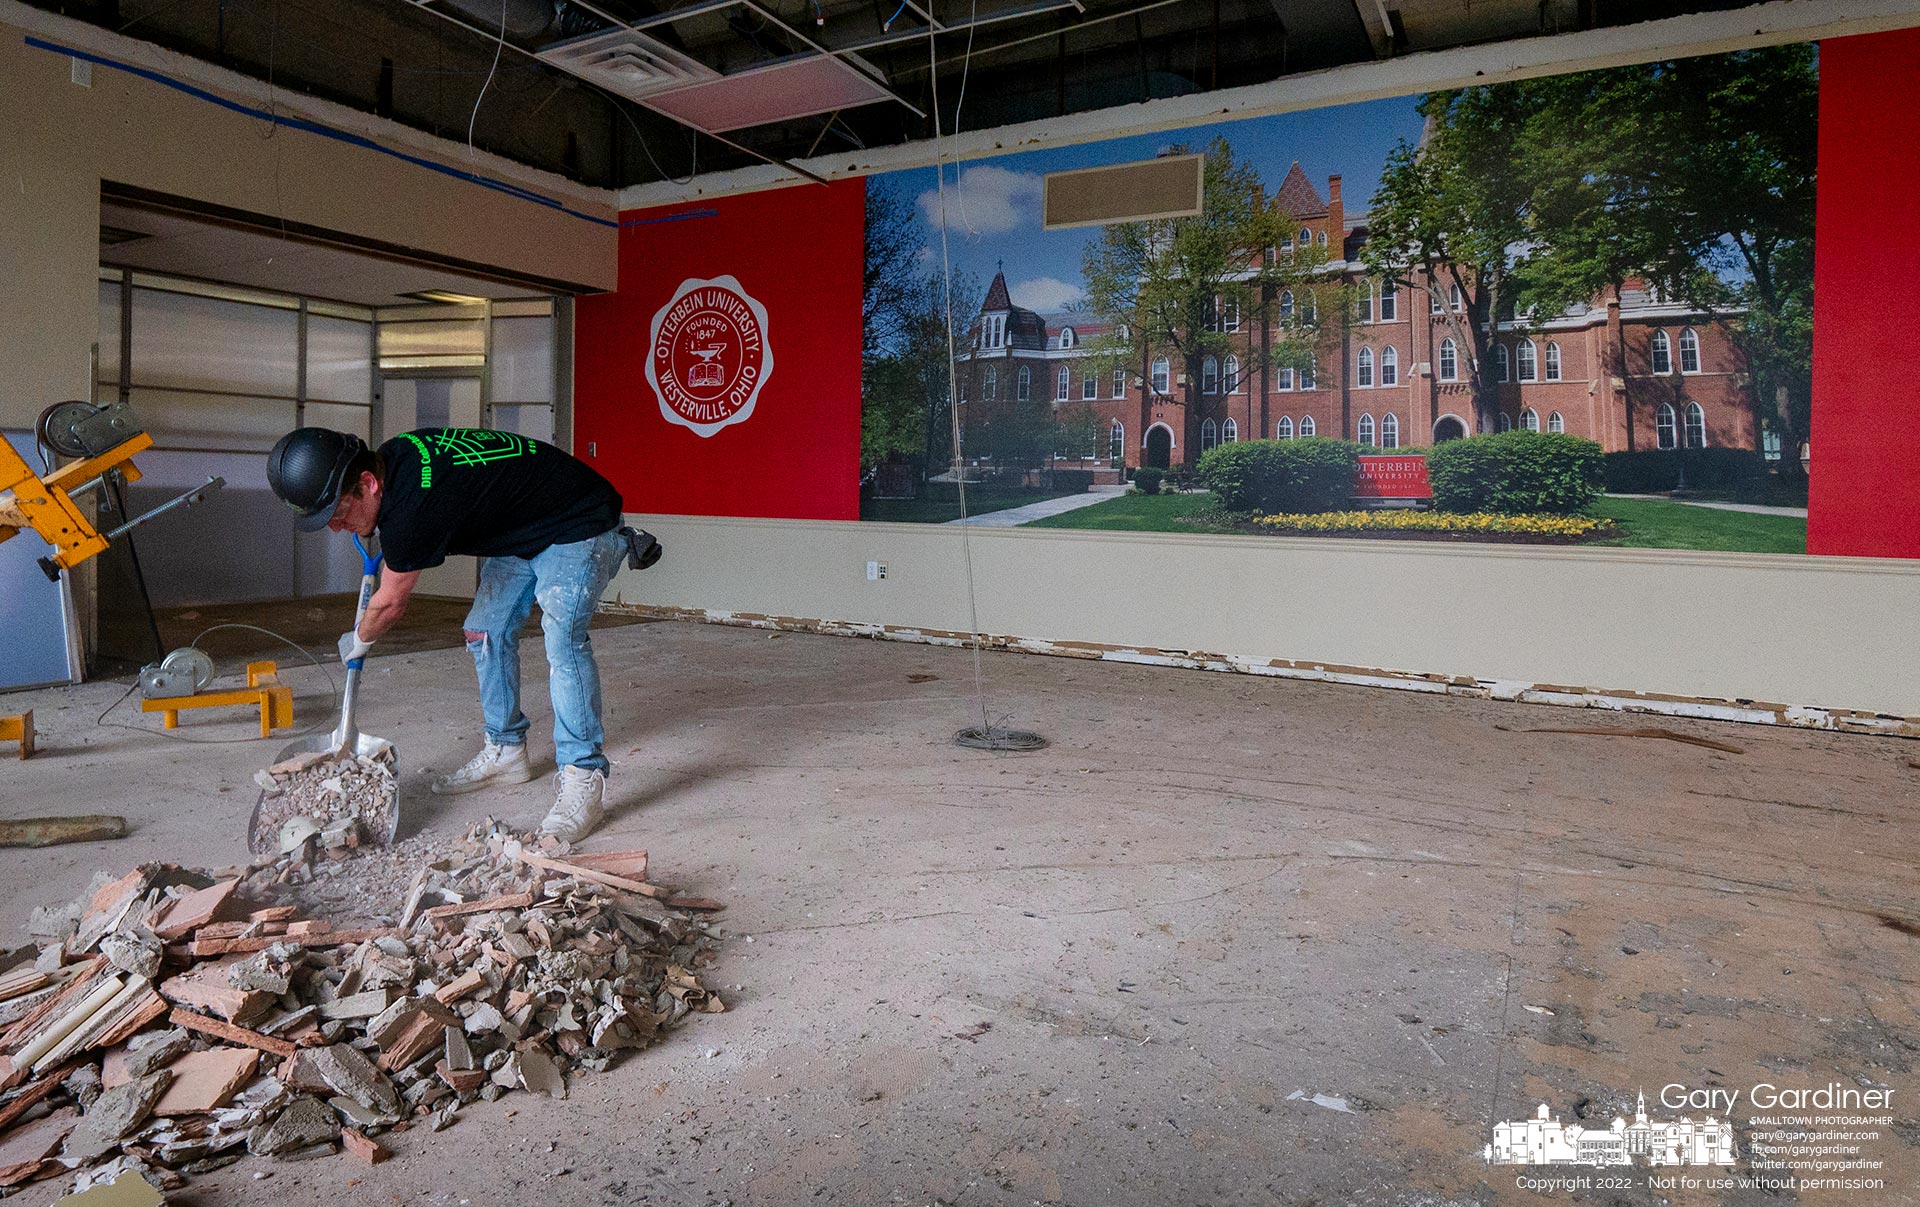 A construction worker shovels debris collected from the demolition of a dining room at the Otterbein University Campus Center as it undergoes a multi-million dollar renovation. My Final Photo for April 13, 2022.